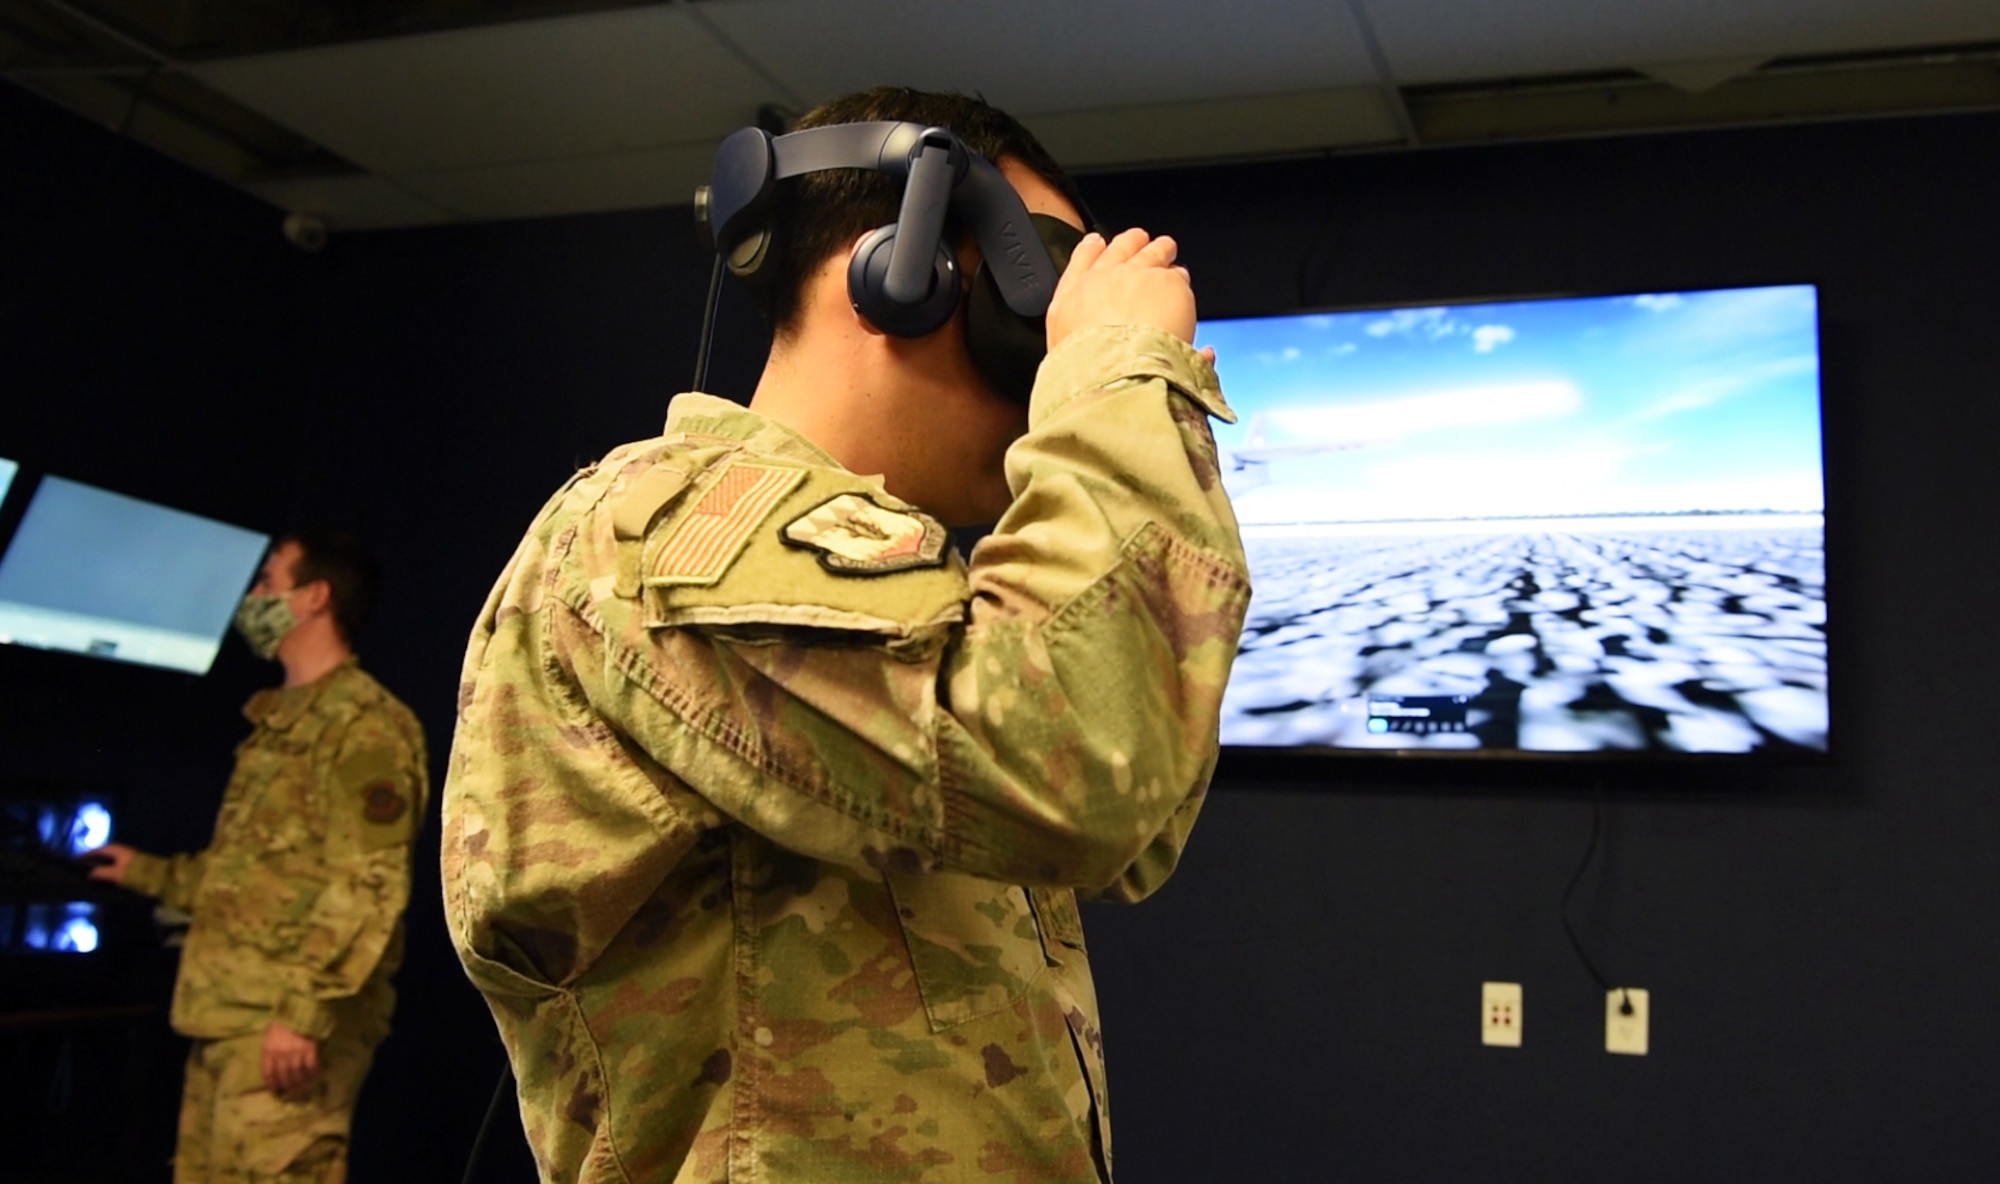 Maintenance instructor uses virtual reality equipment for training